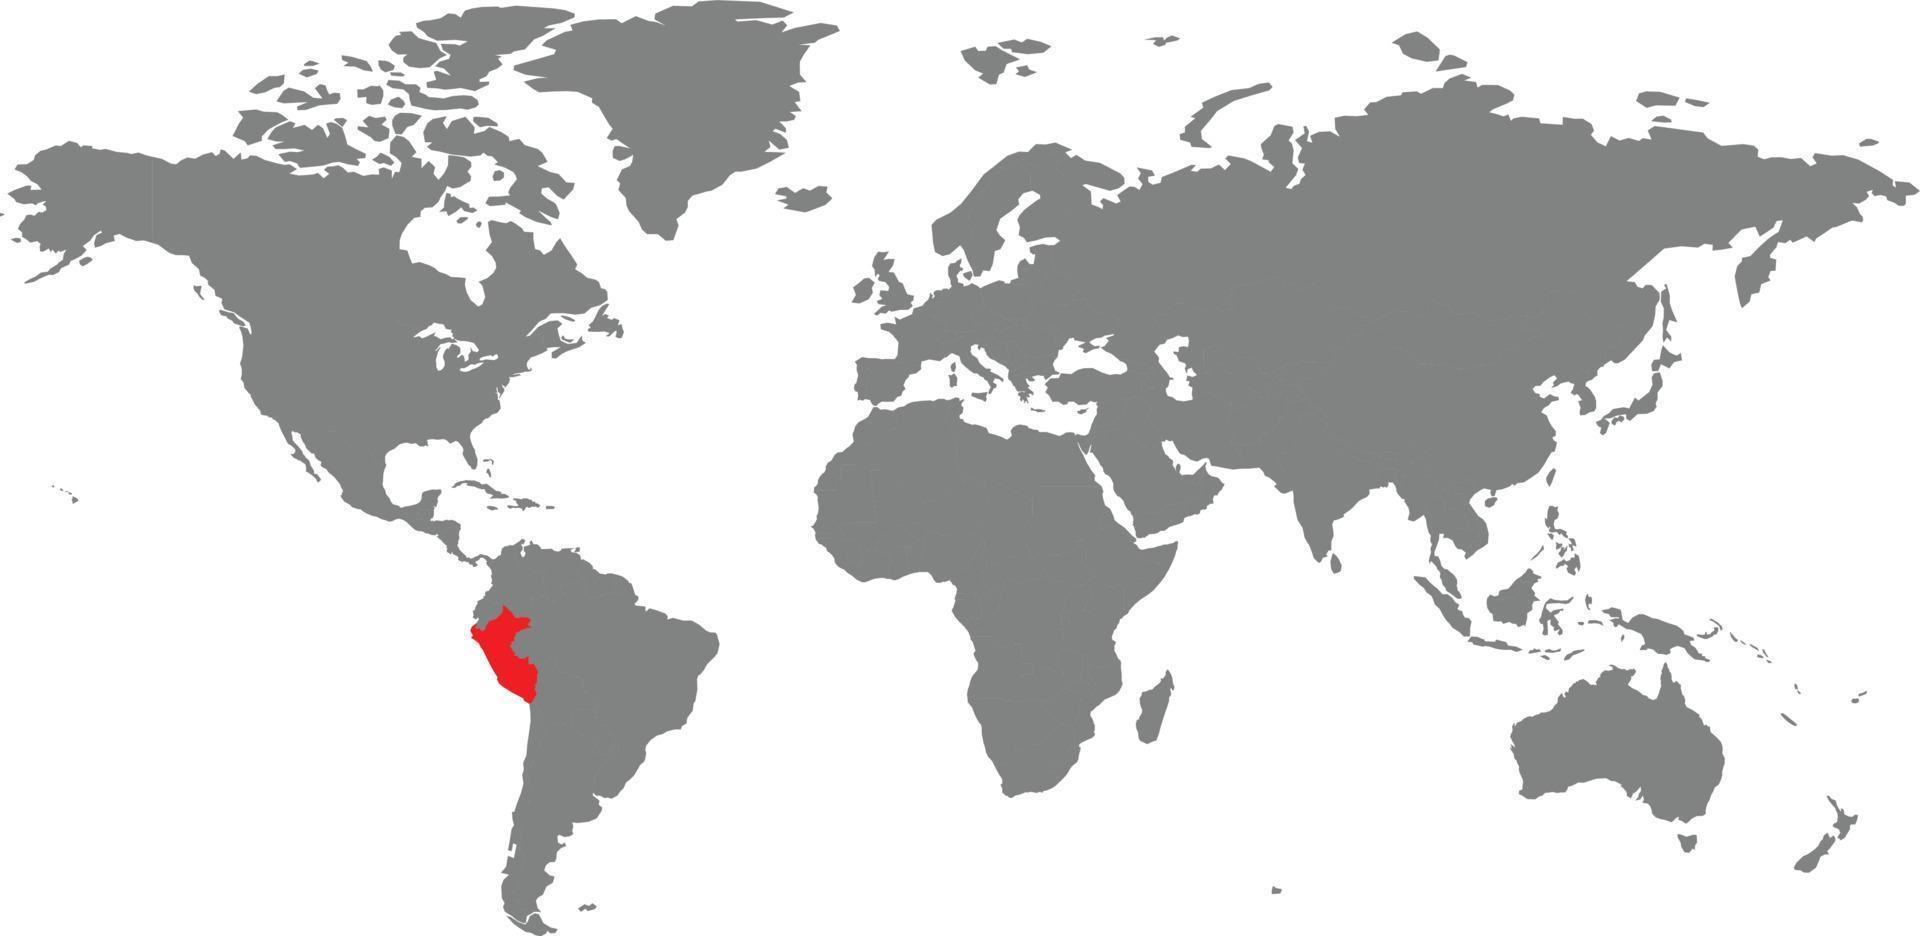 Portugal map on the world map vector